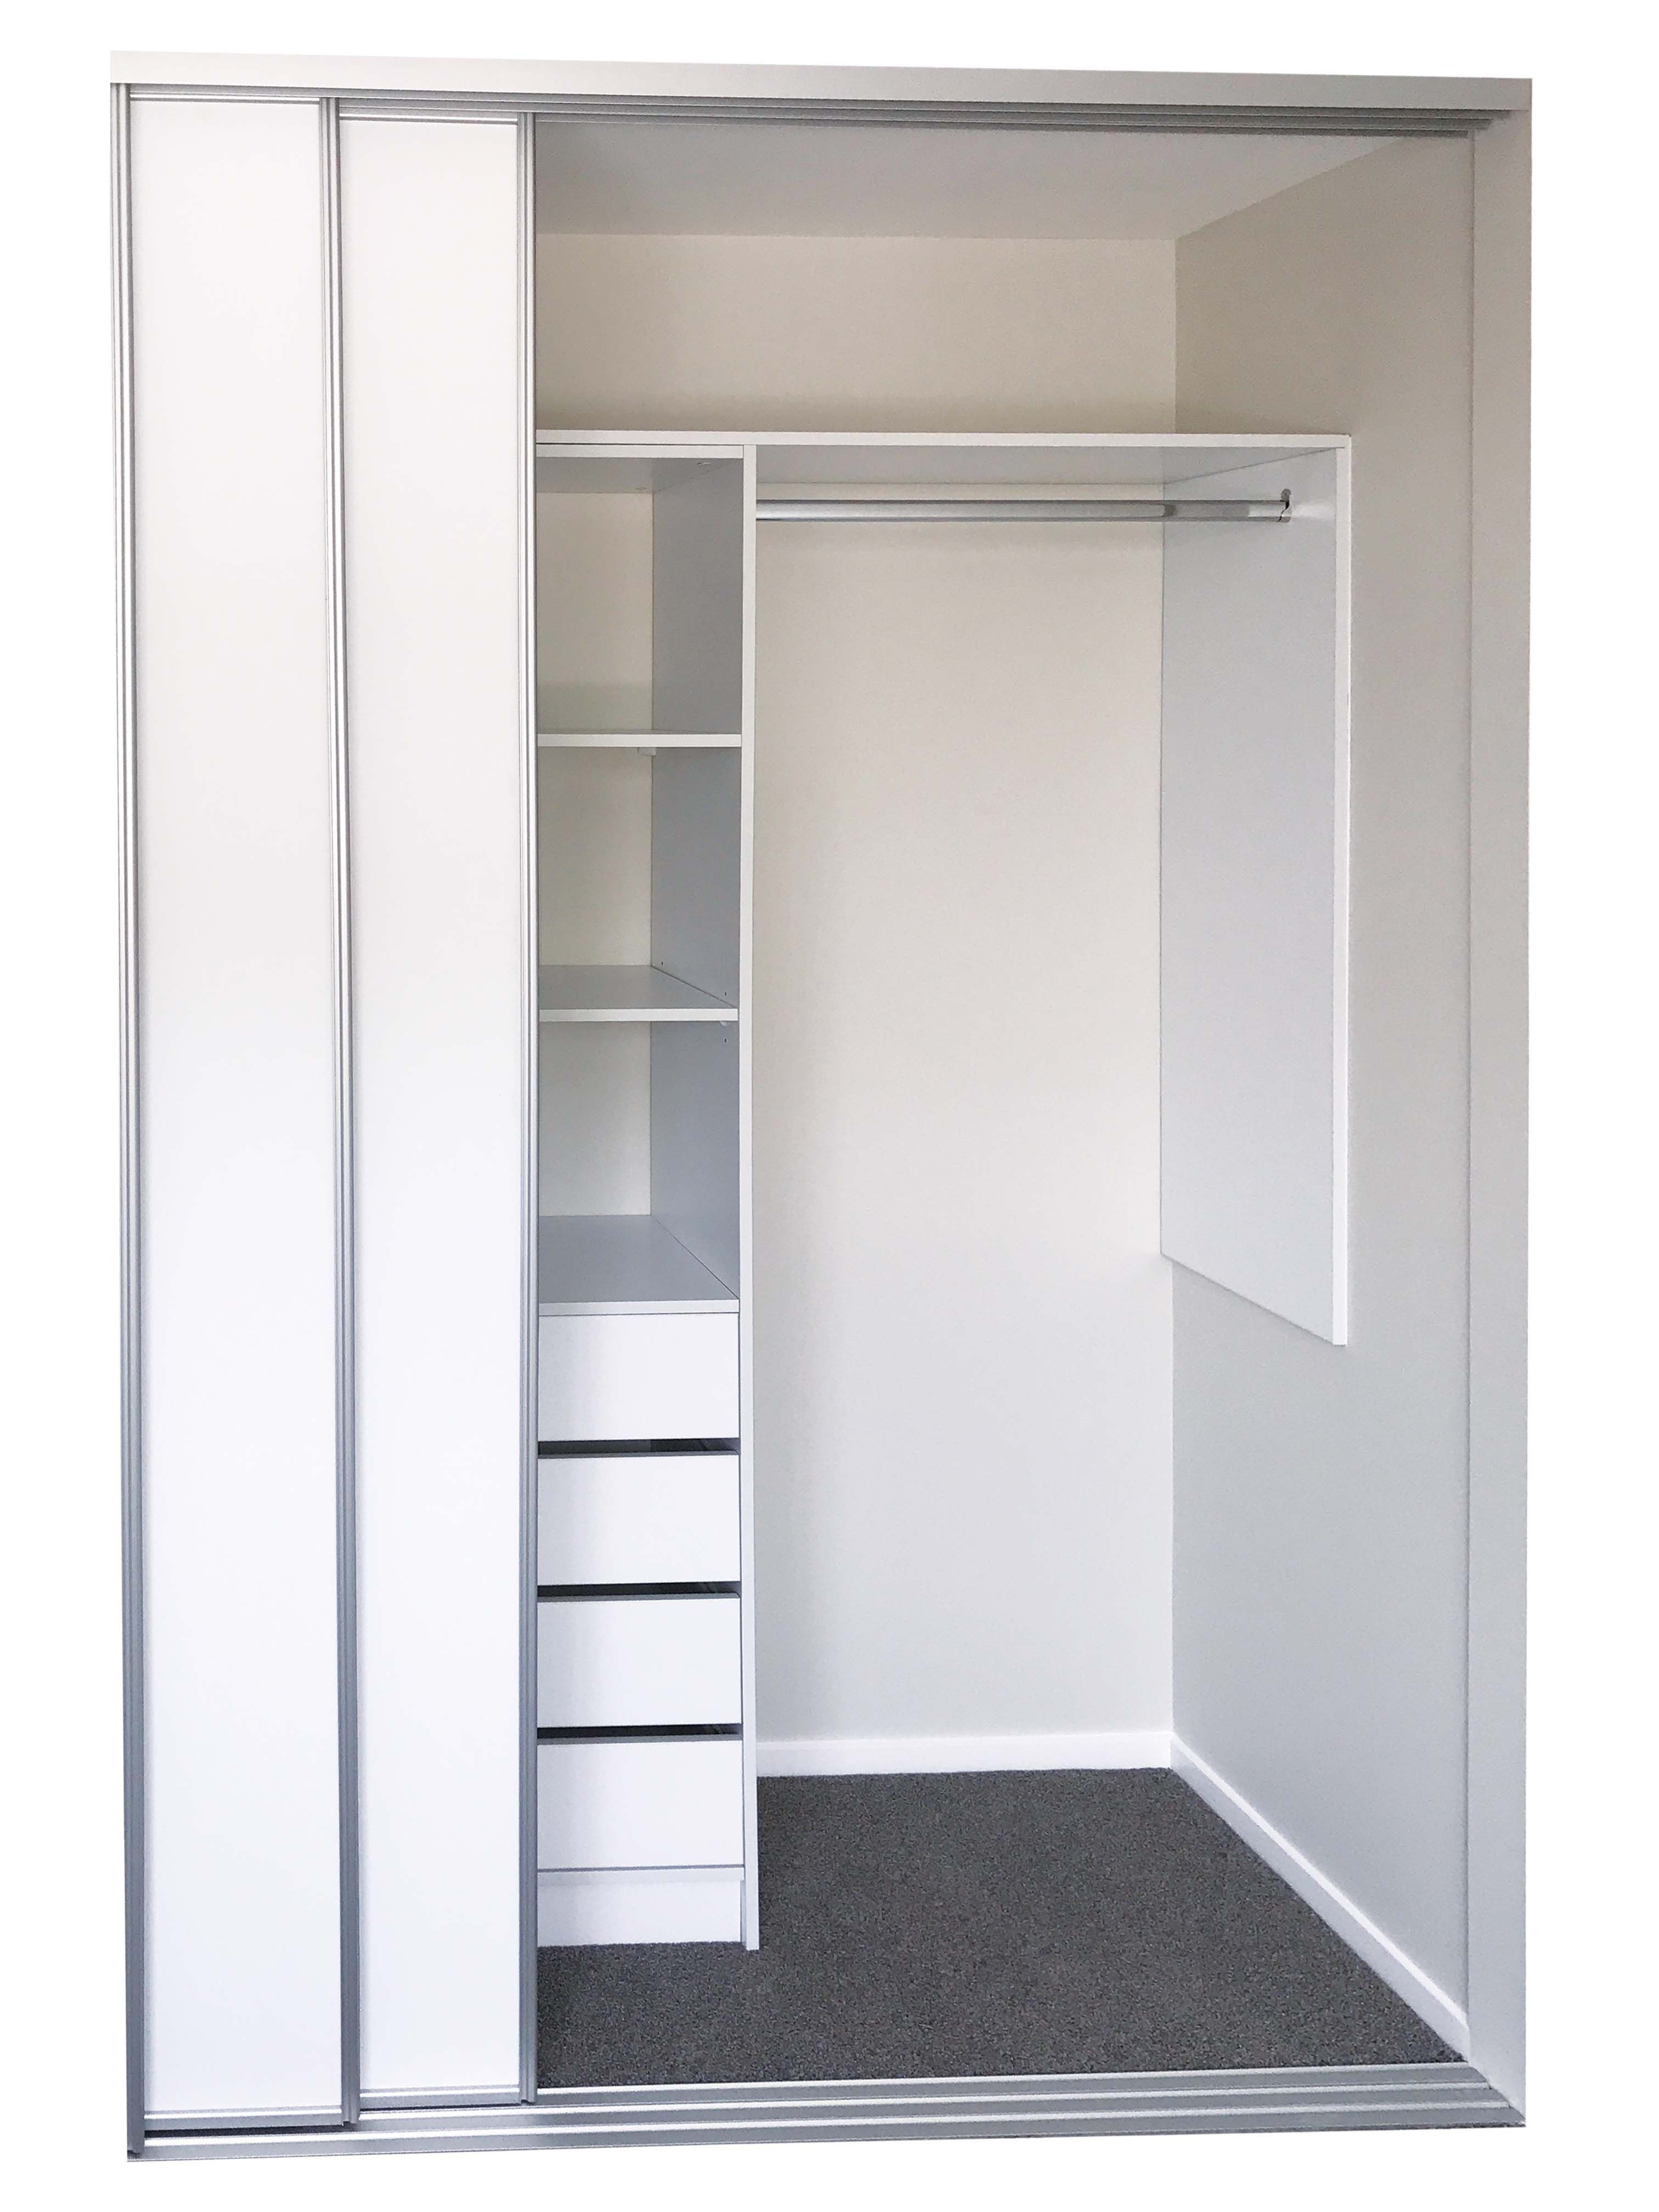 Genesis Modular Floor Standing Wardrobe Shelving | Showerwell Home Products For Wardrobes With 3 Shelving Towers (Photo 2 of 15)